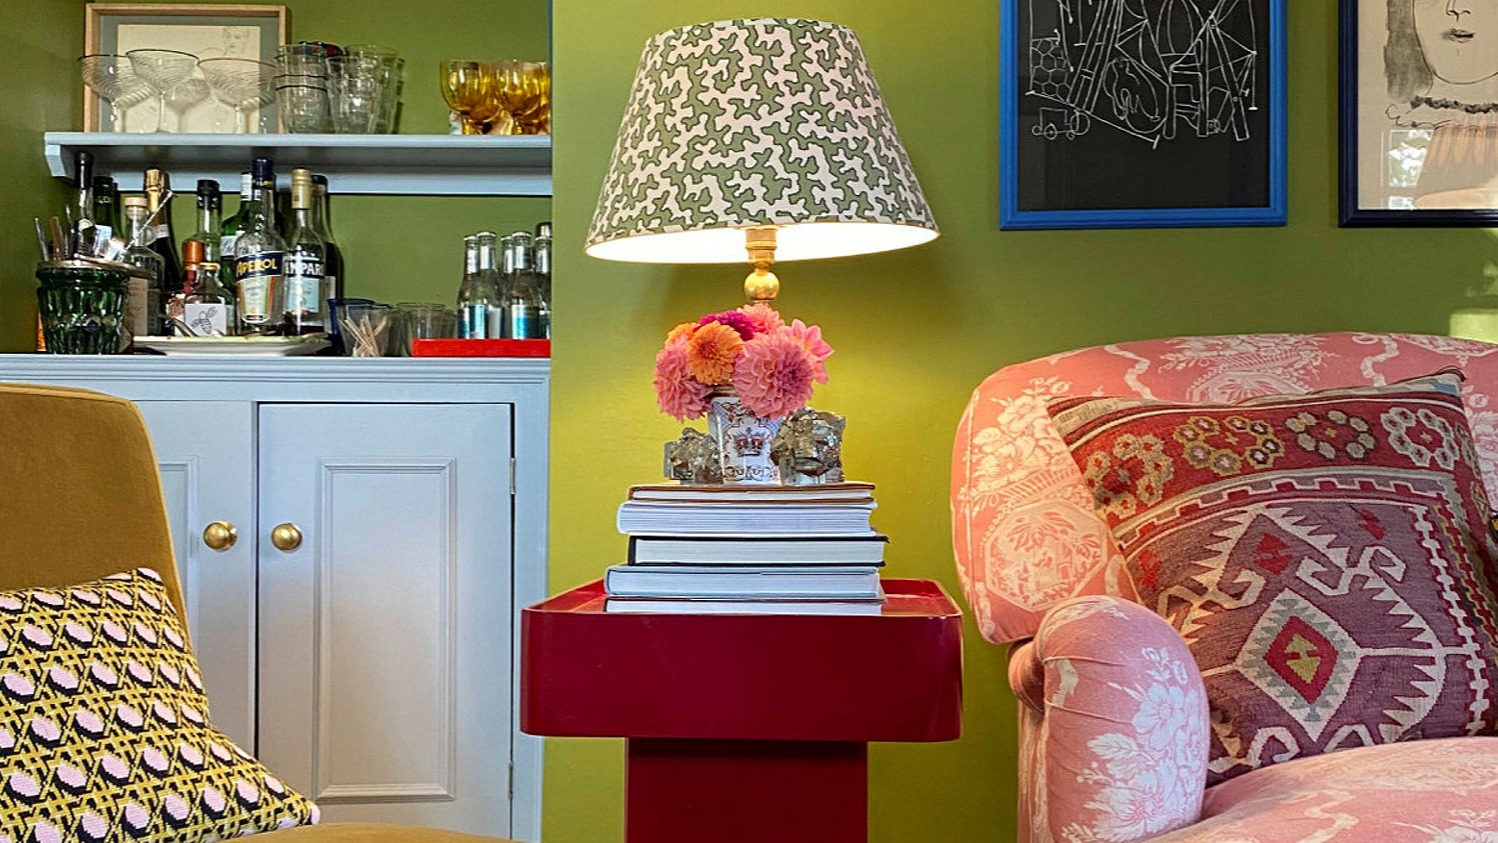 In search of the perfect lampshade | Financial Times